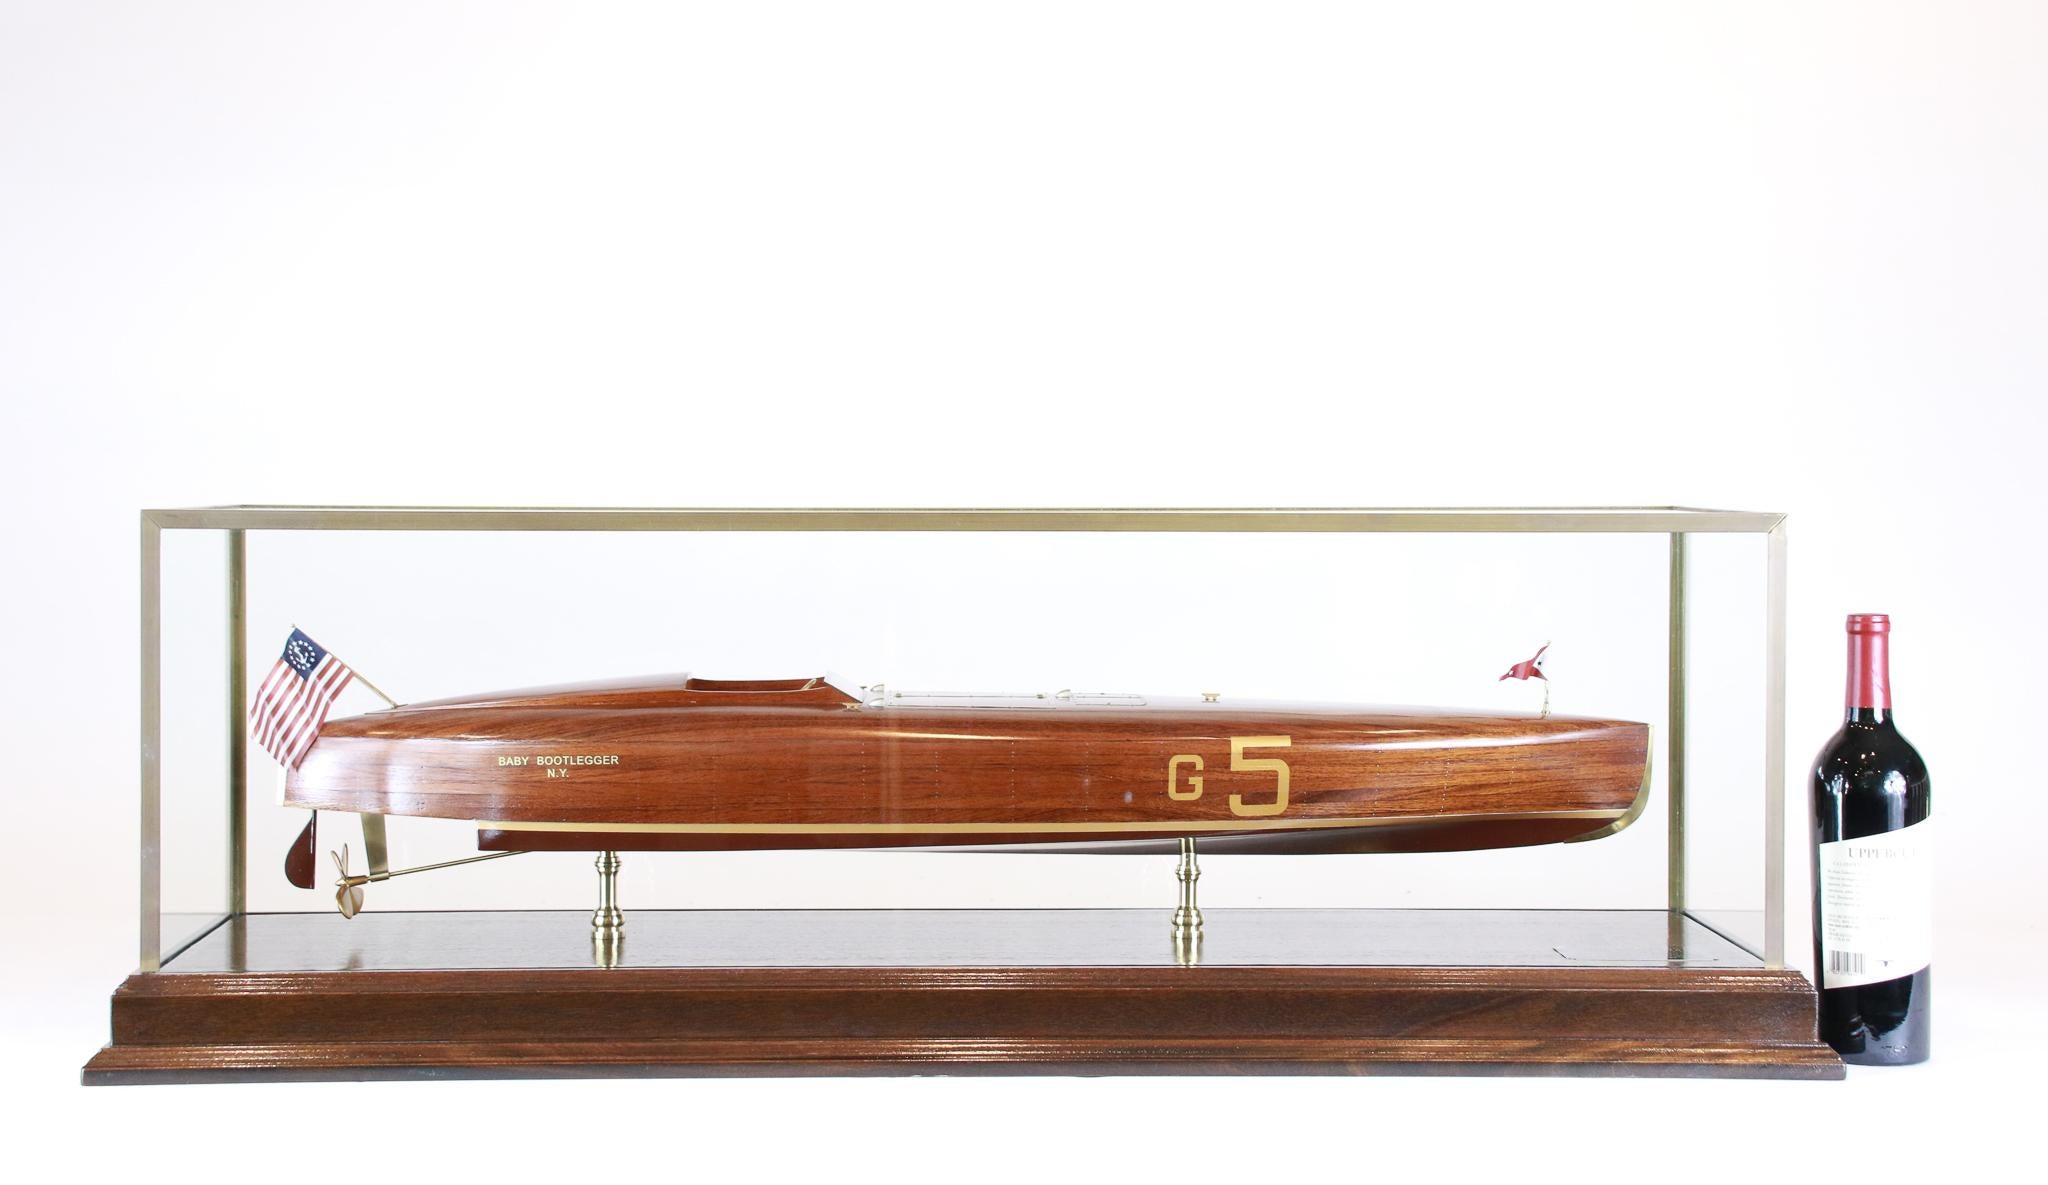 Model of the 1924 American wood-built speedboat Baby Bootlegger. Built for race car driver and Indianapolis 500 competitor Caleb Bragg (1885-1943), the Bootlegger was fitted with a 200 horsepower converted aircraft engine from the First World War.